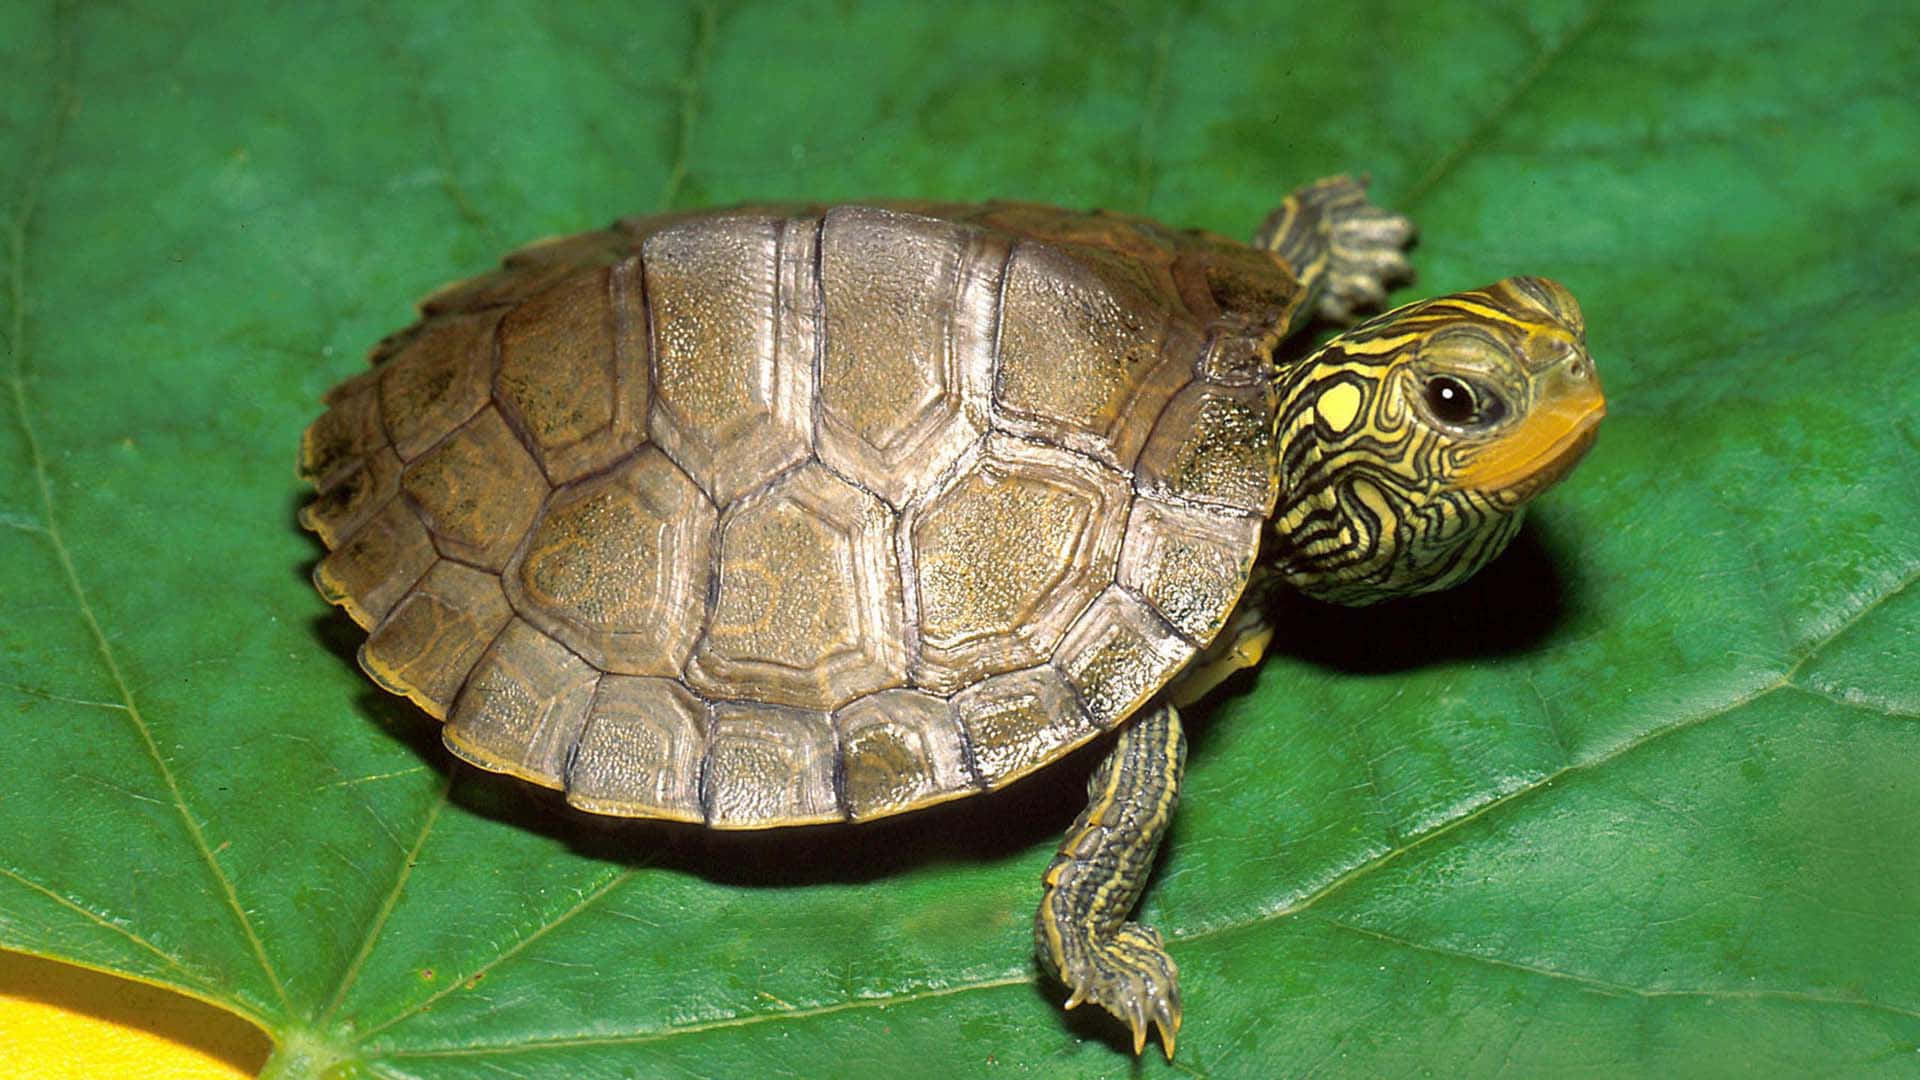 A funny-looking turtle takes a break